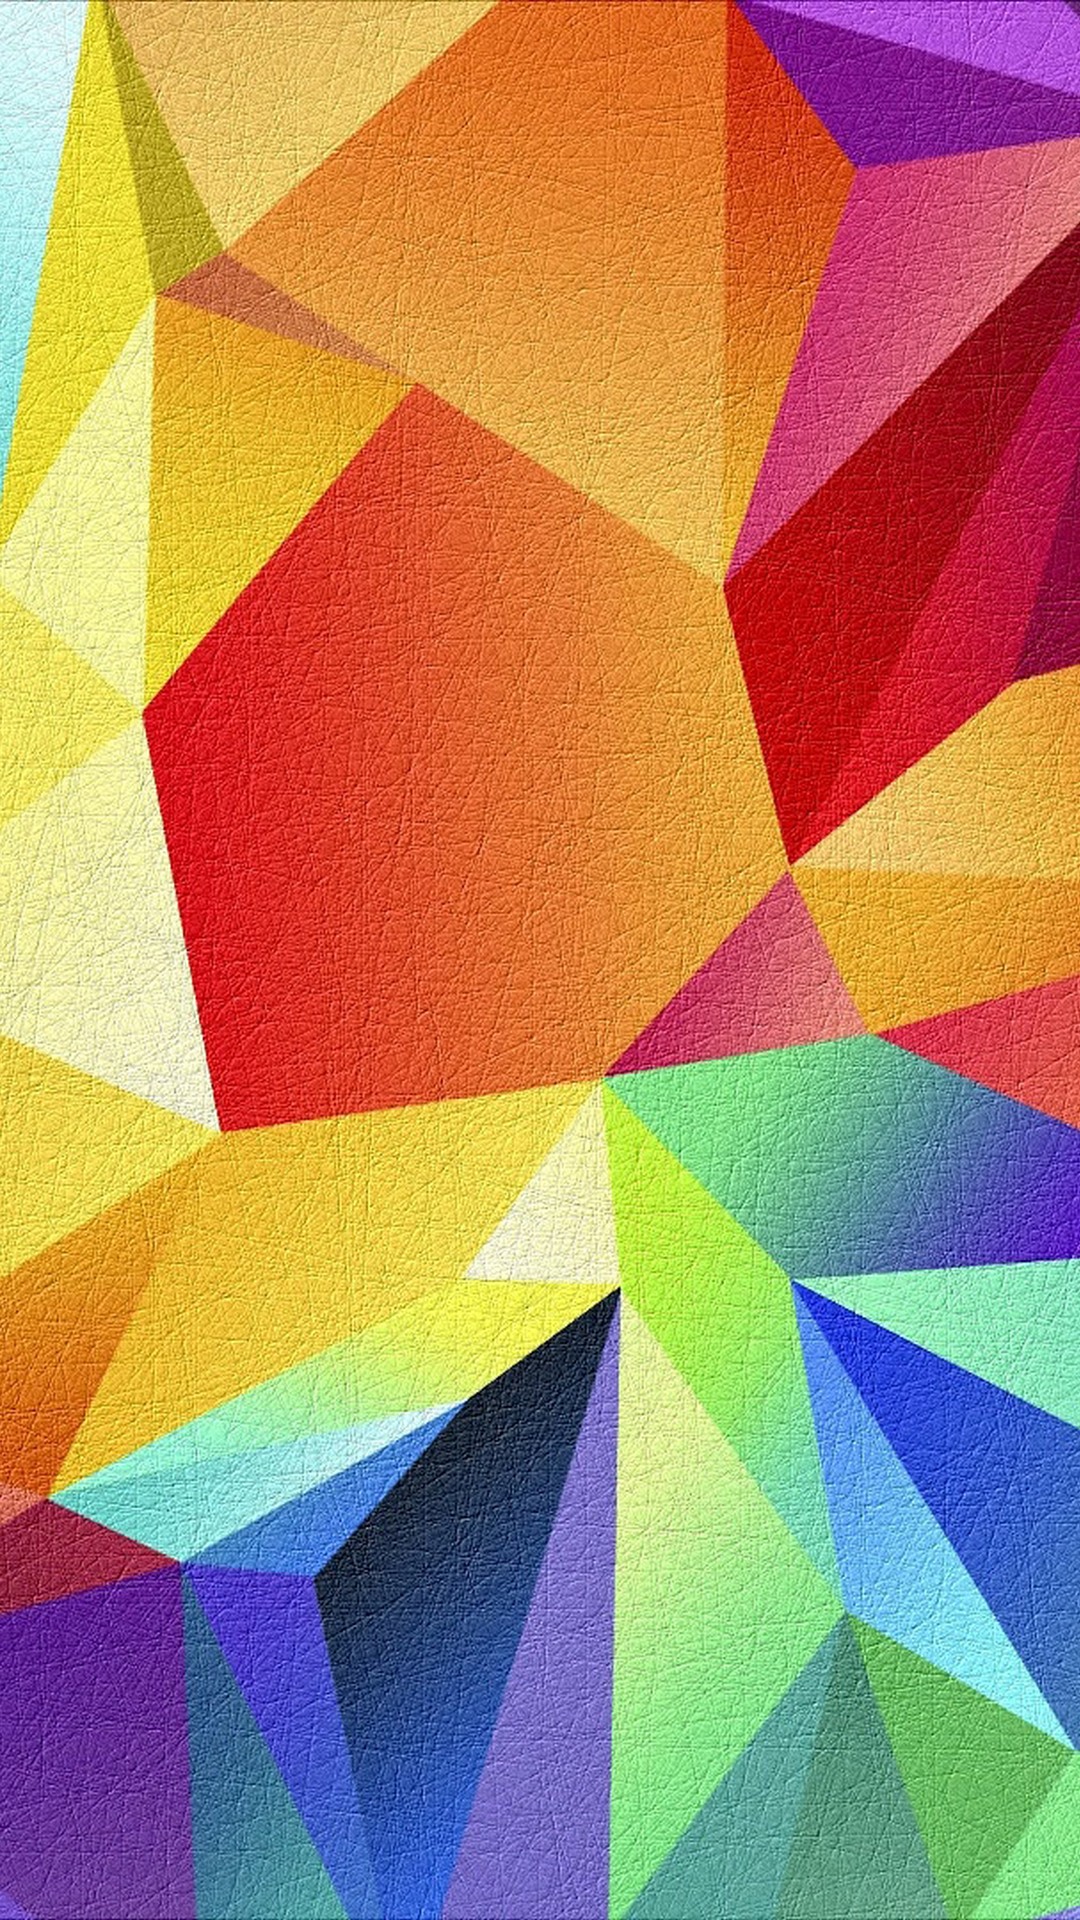 Geometric Phone Wallpaper with high-resolution 1080x1920 pixel. Download all Mobile Wallpapers and Use them as wallpapers for your iPhone, Tablet, iPad, Android and other mobile devices